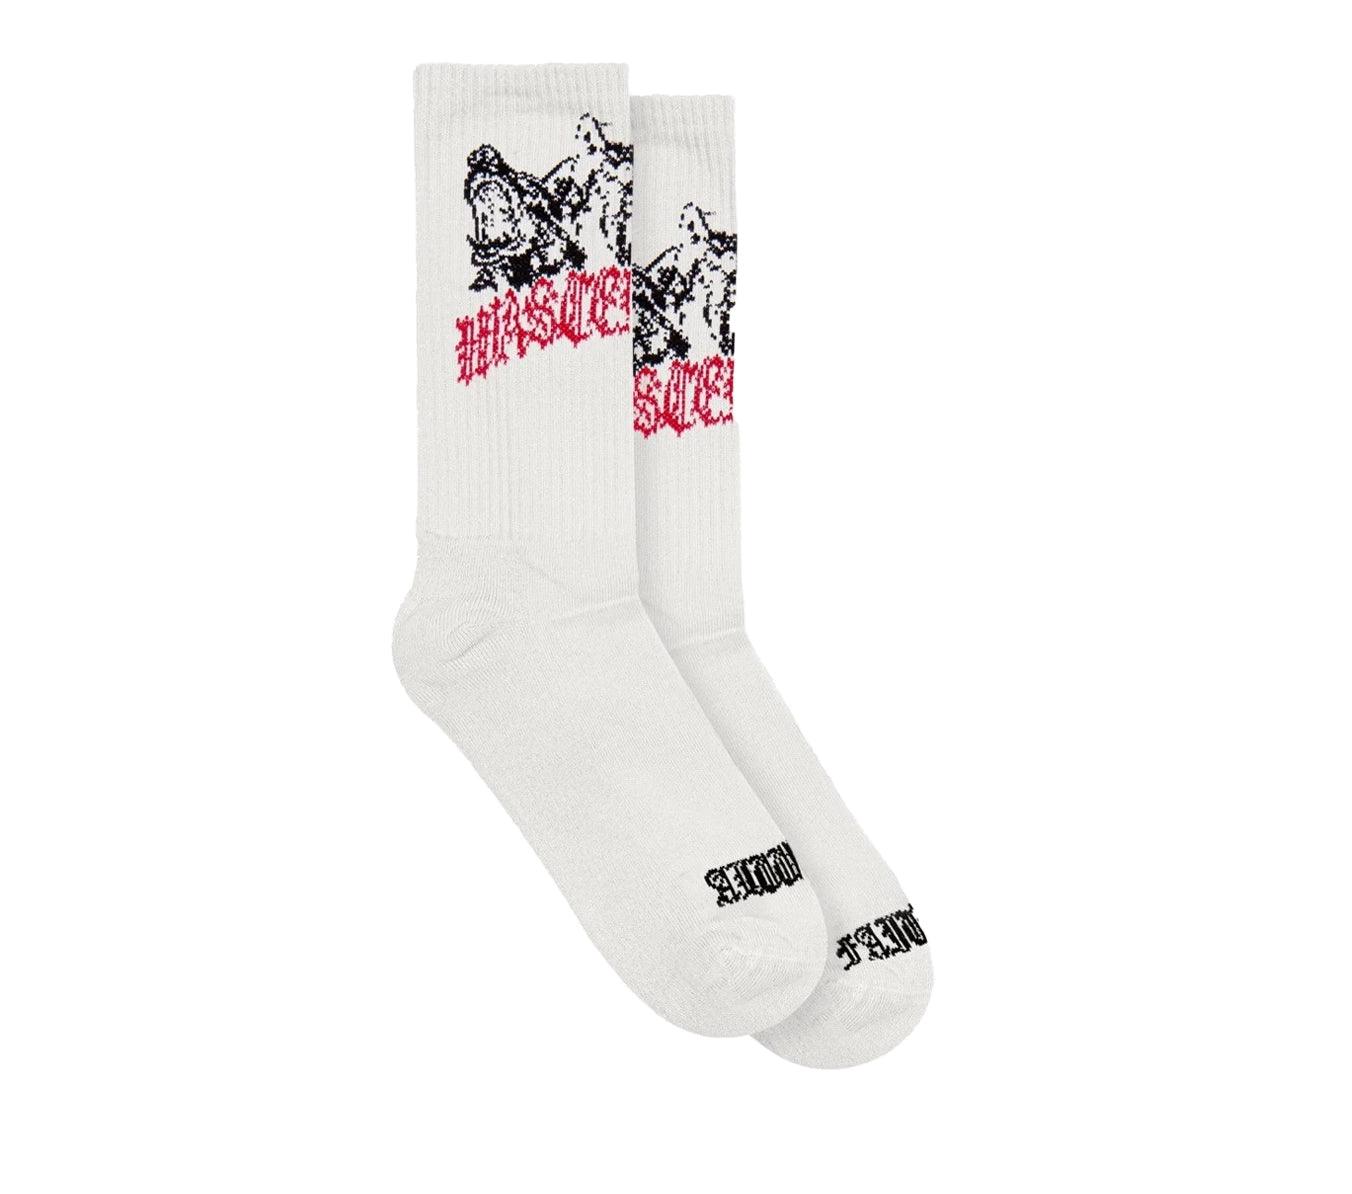 Wasted Paris Guardian Socks - Off-White - One size - Socks